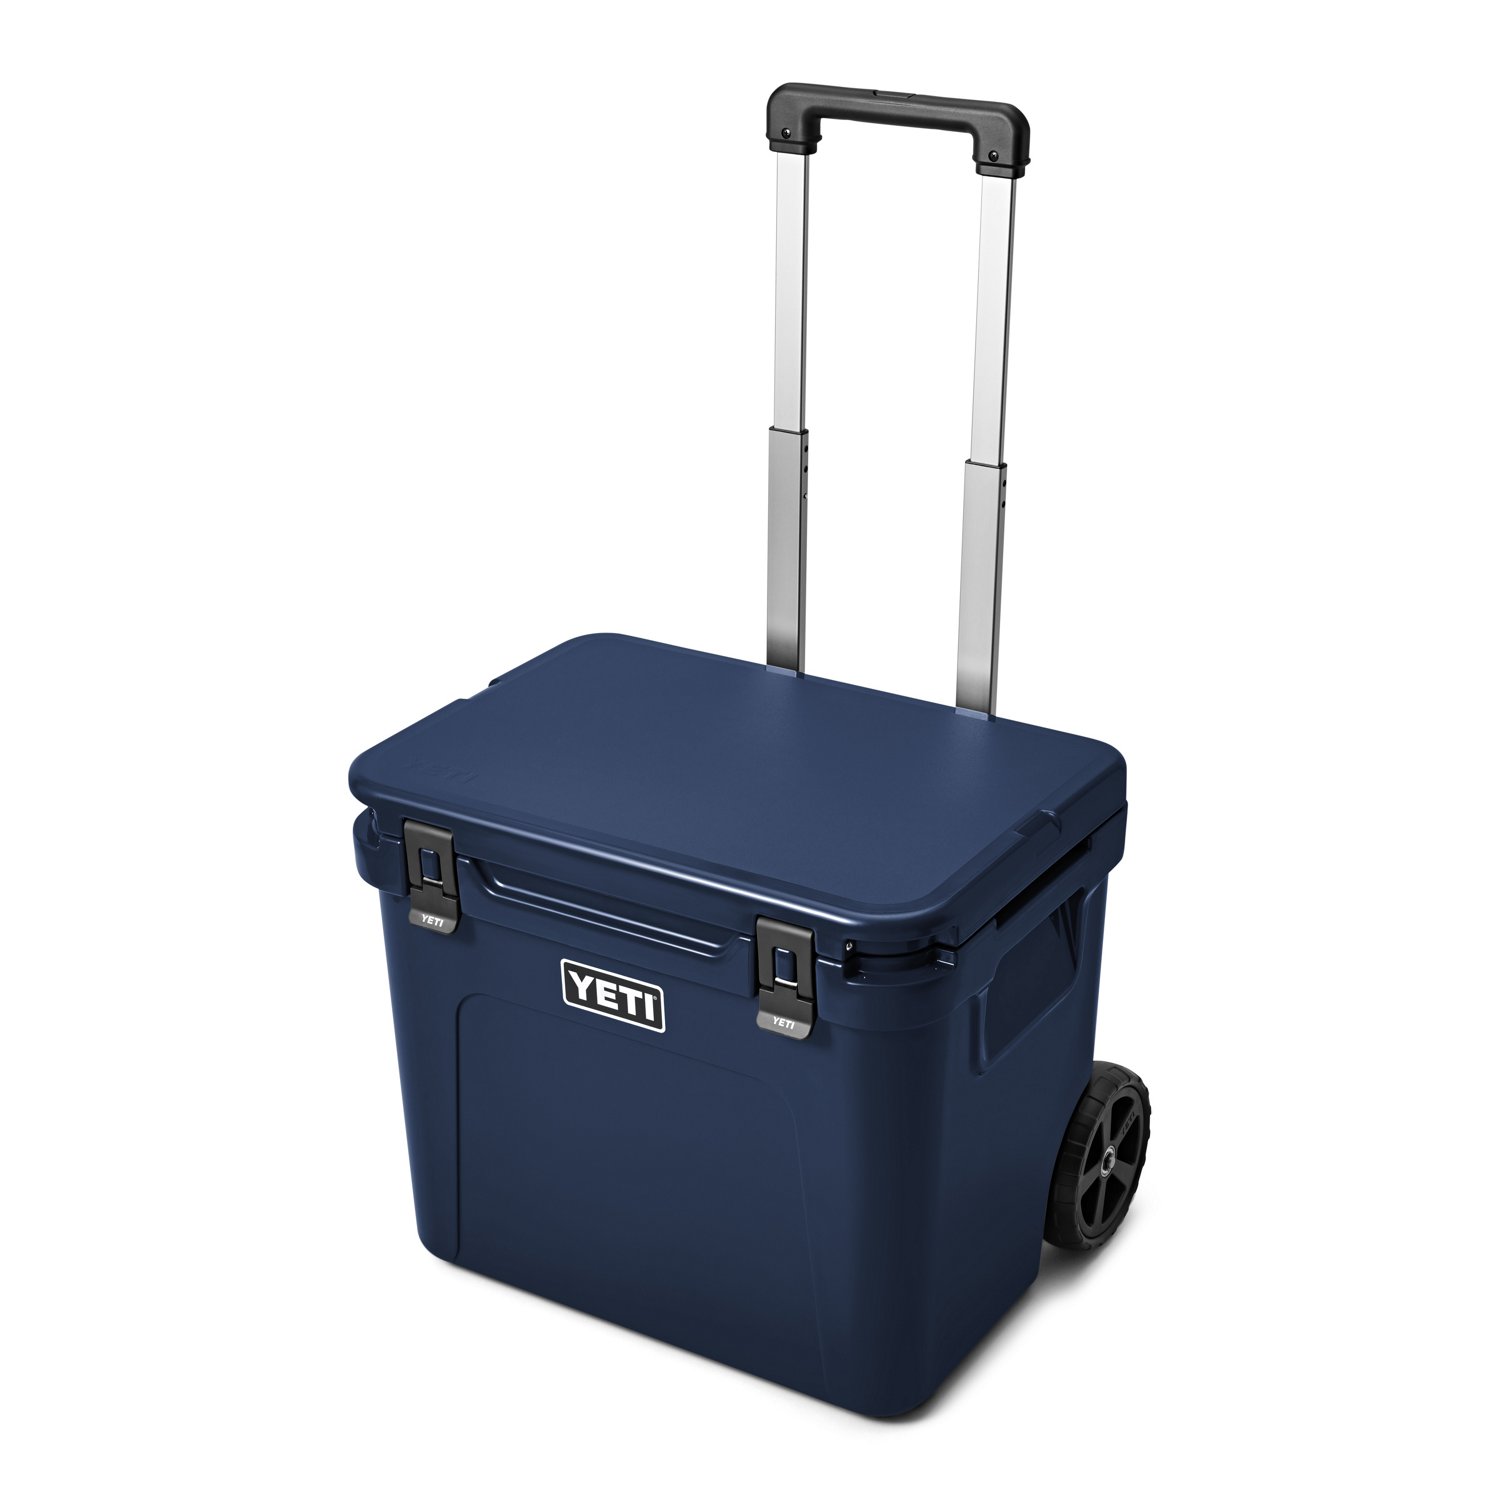 https://academy.scene7.com/is/image/academy///camping/coolers/blue_yeti-roadie-60-wheeled-cooler_10023200000/b5ad73bf78dd4a0897e89368a7bd9313?$pdp-gallery-ng$